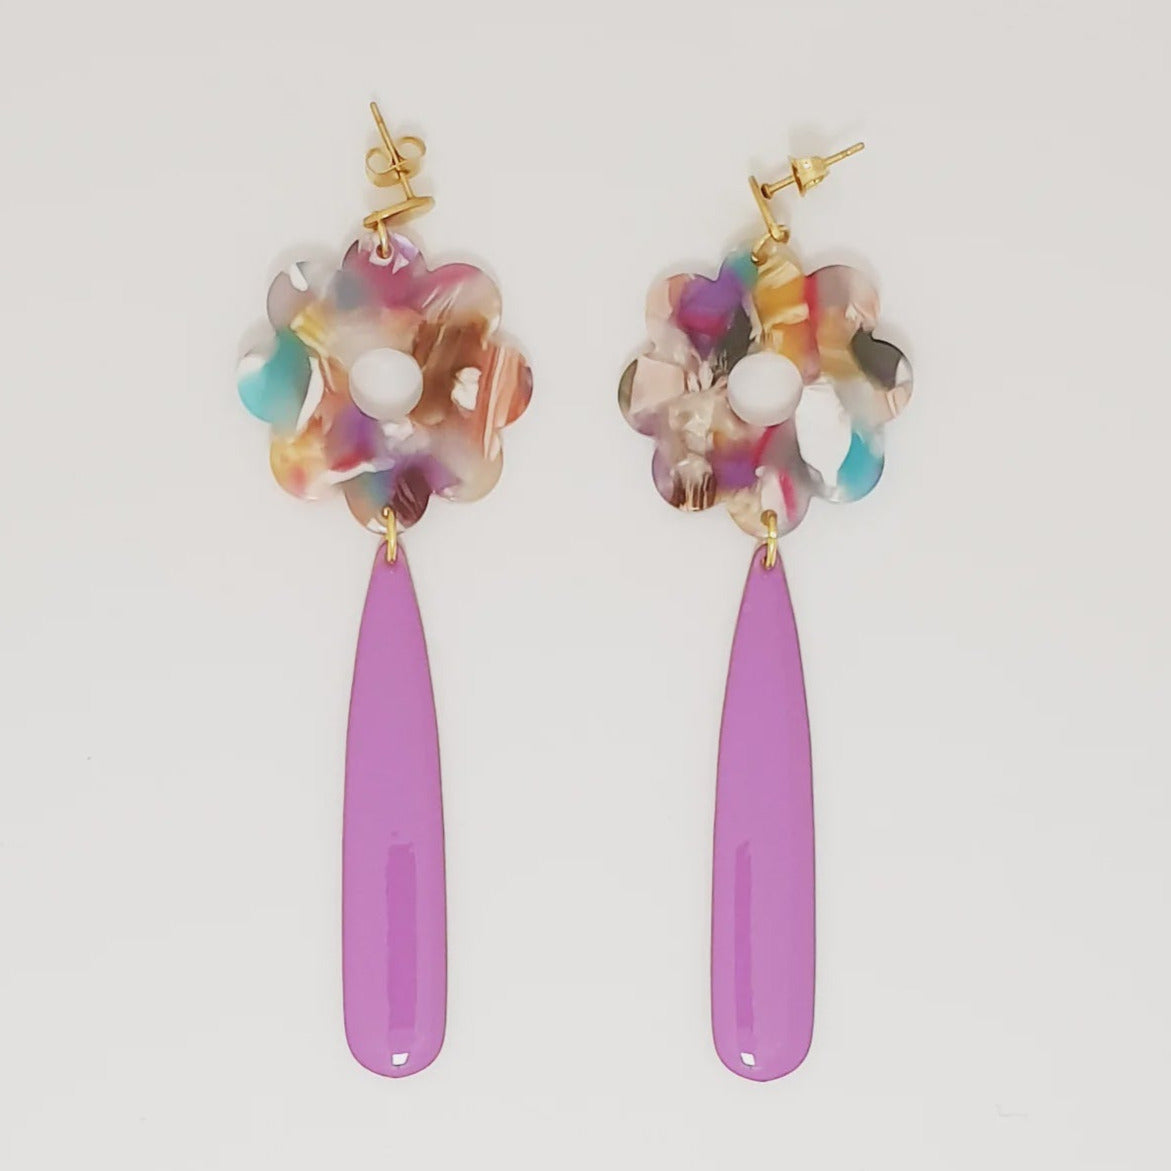 Middle Child Tootsie Earrings - Violet